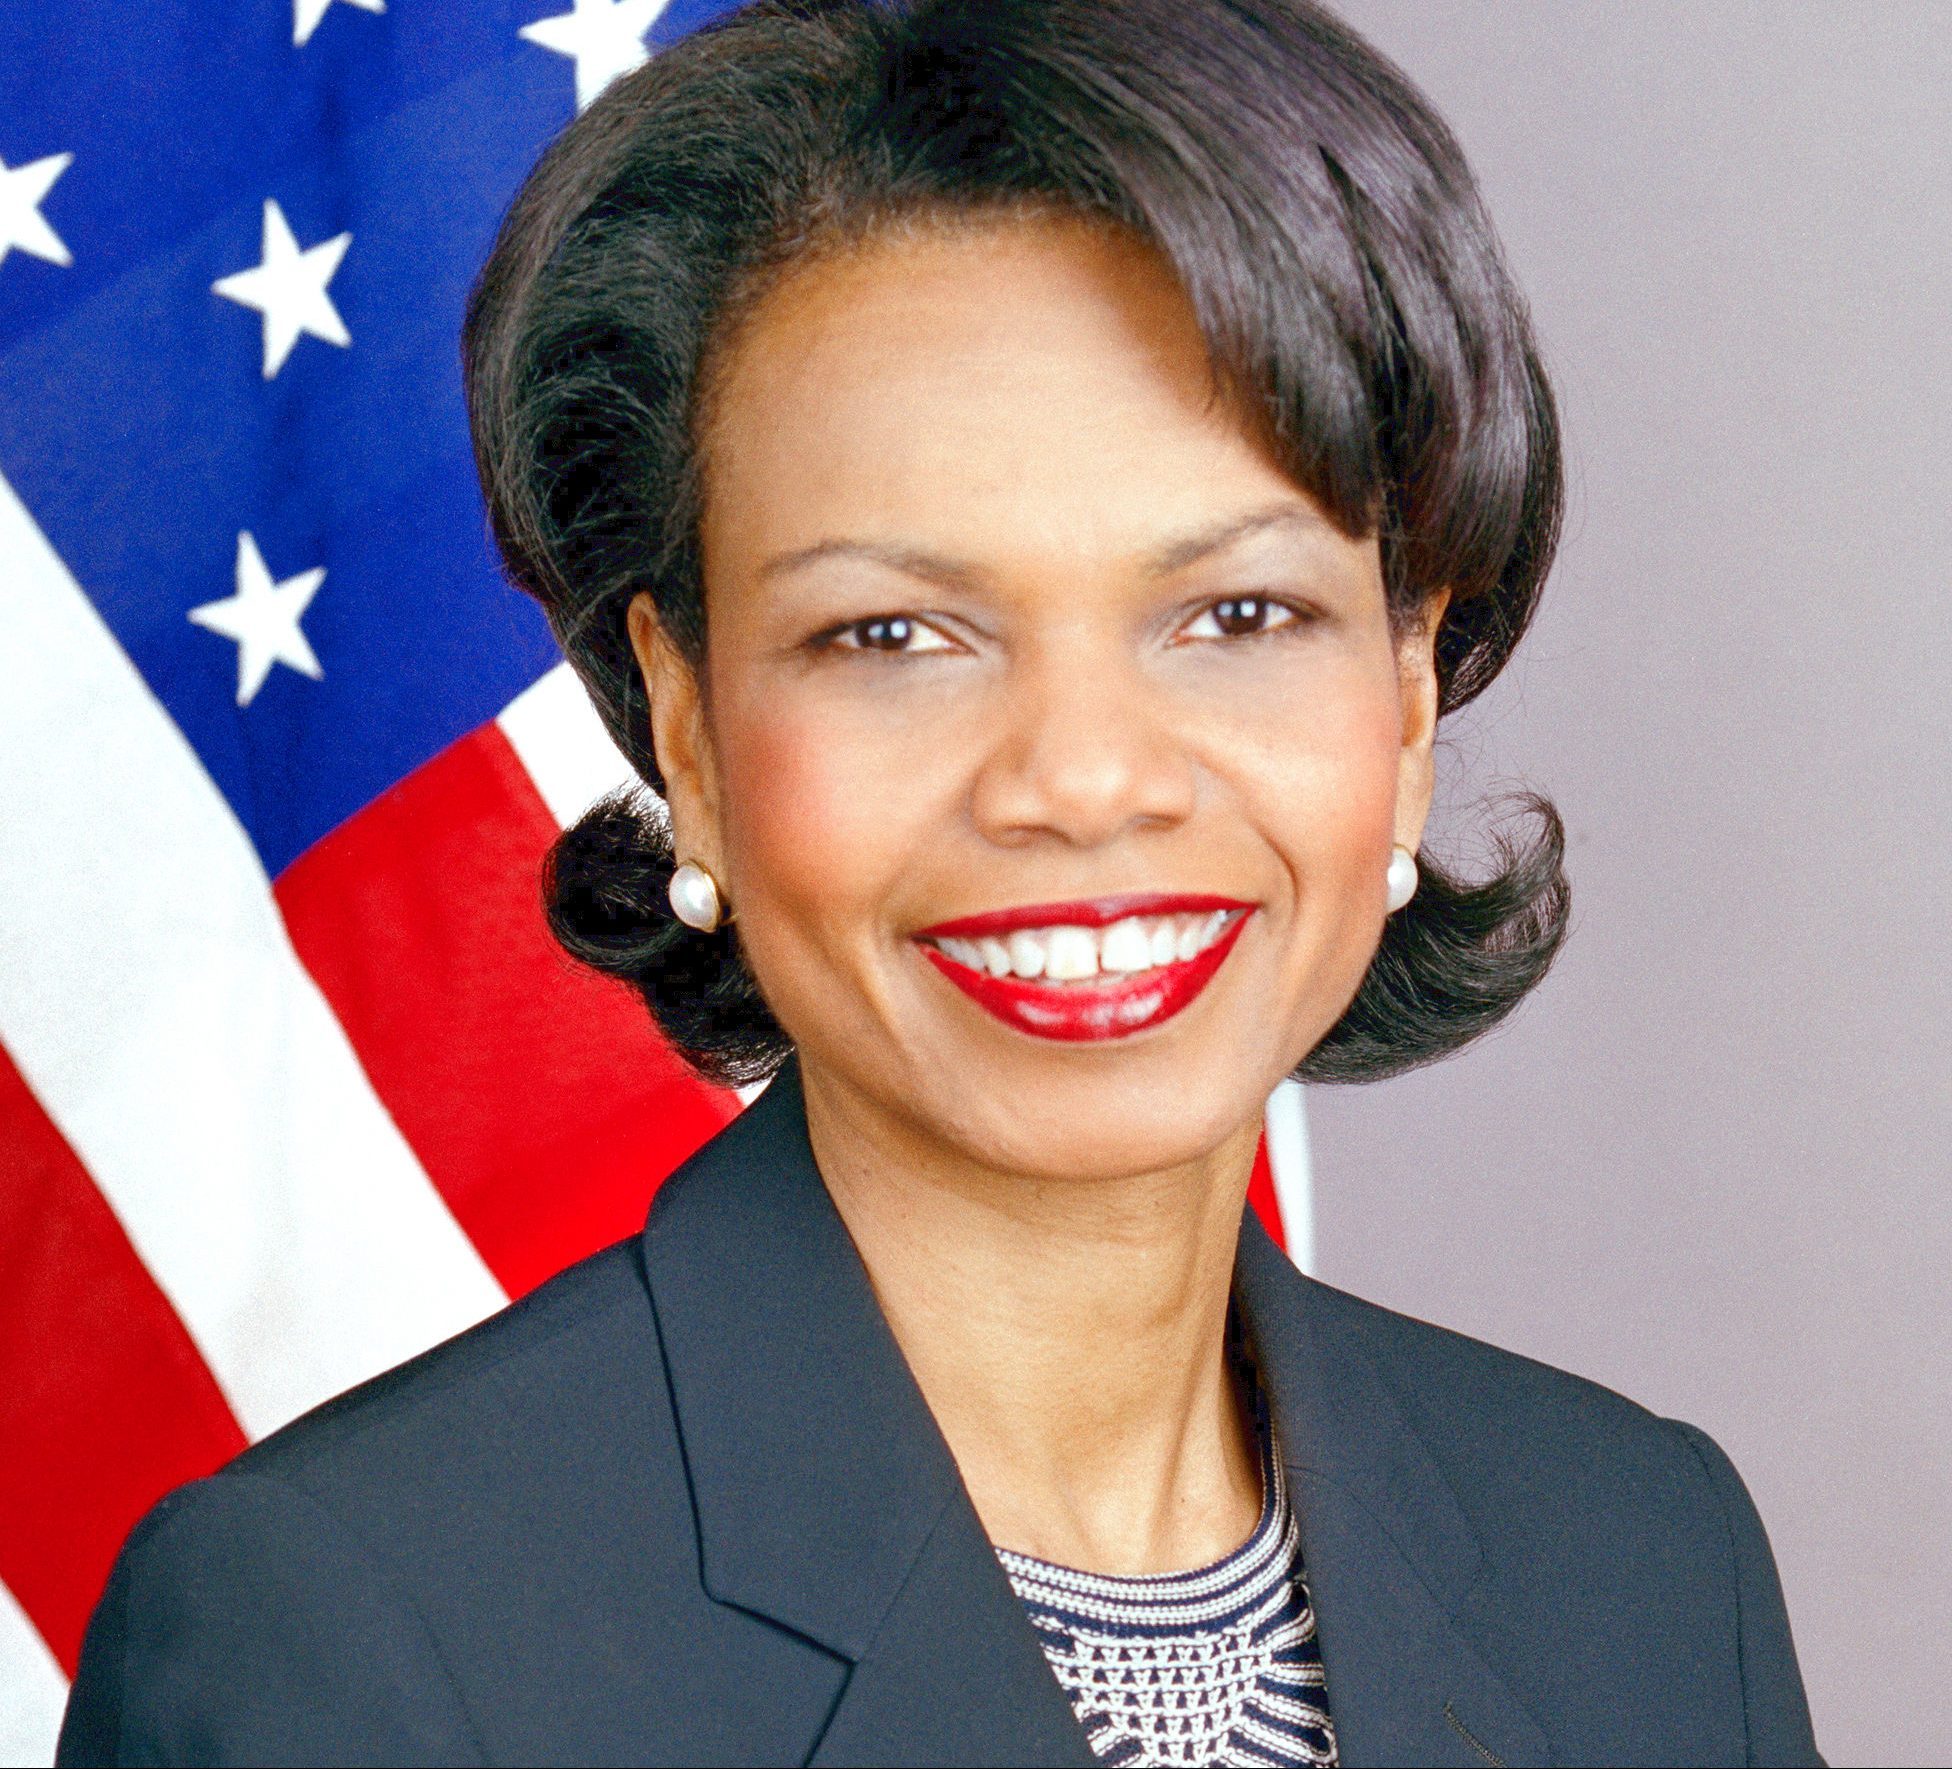 What You Need To Know About The Condoleezza Rice Ubben Lecture The DePauw